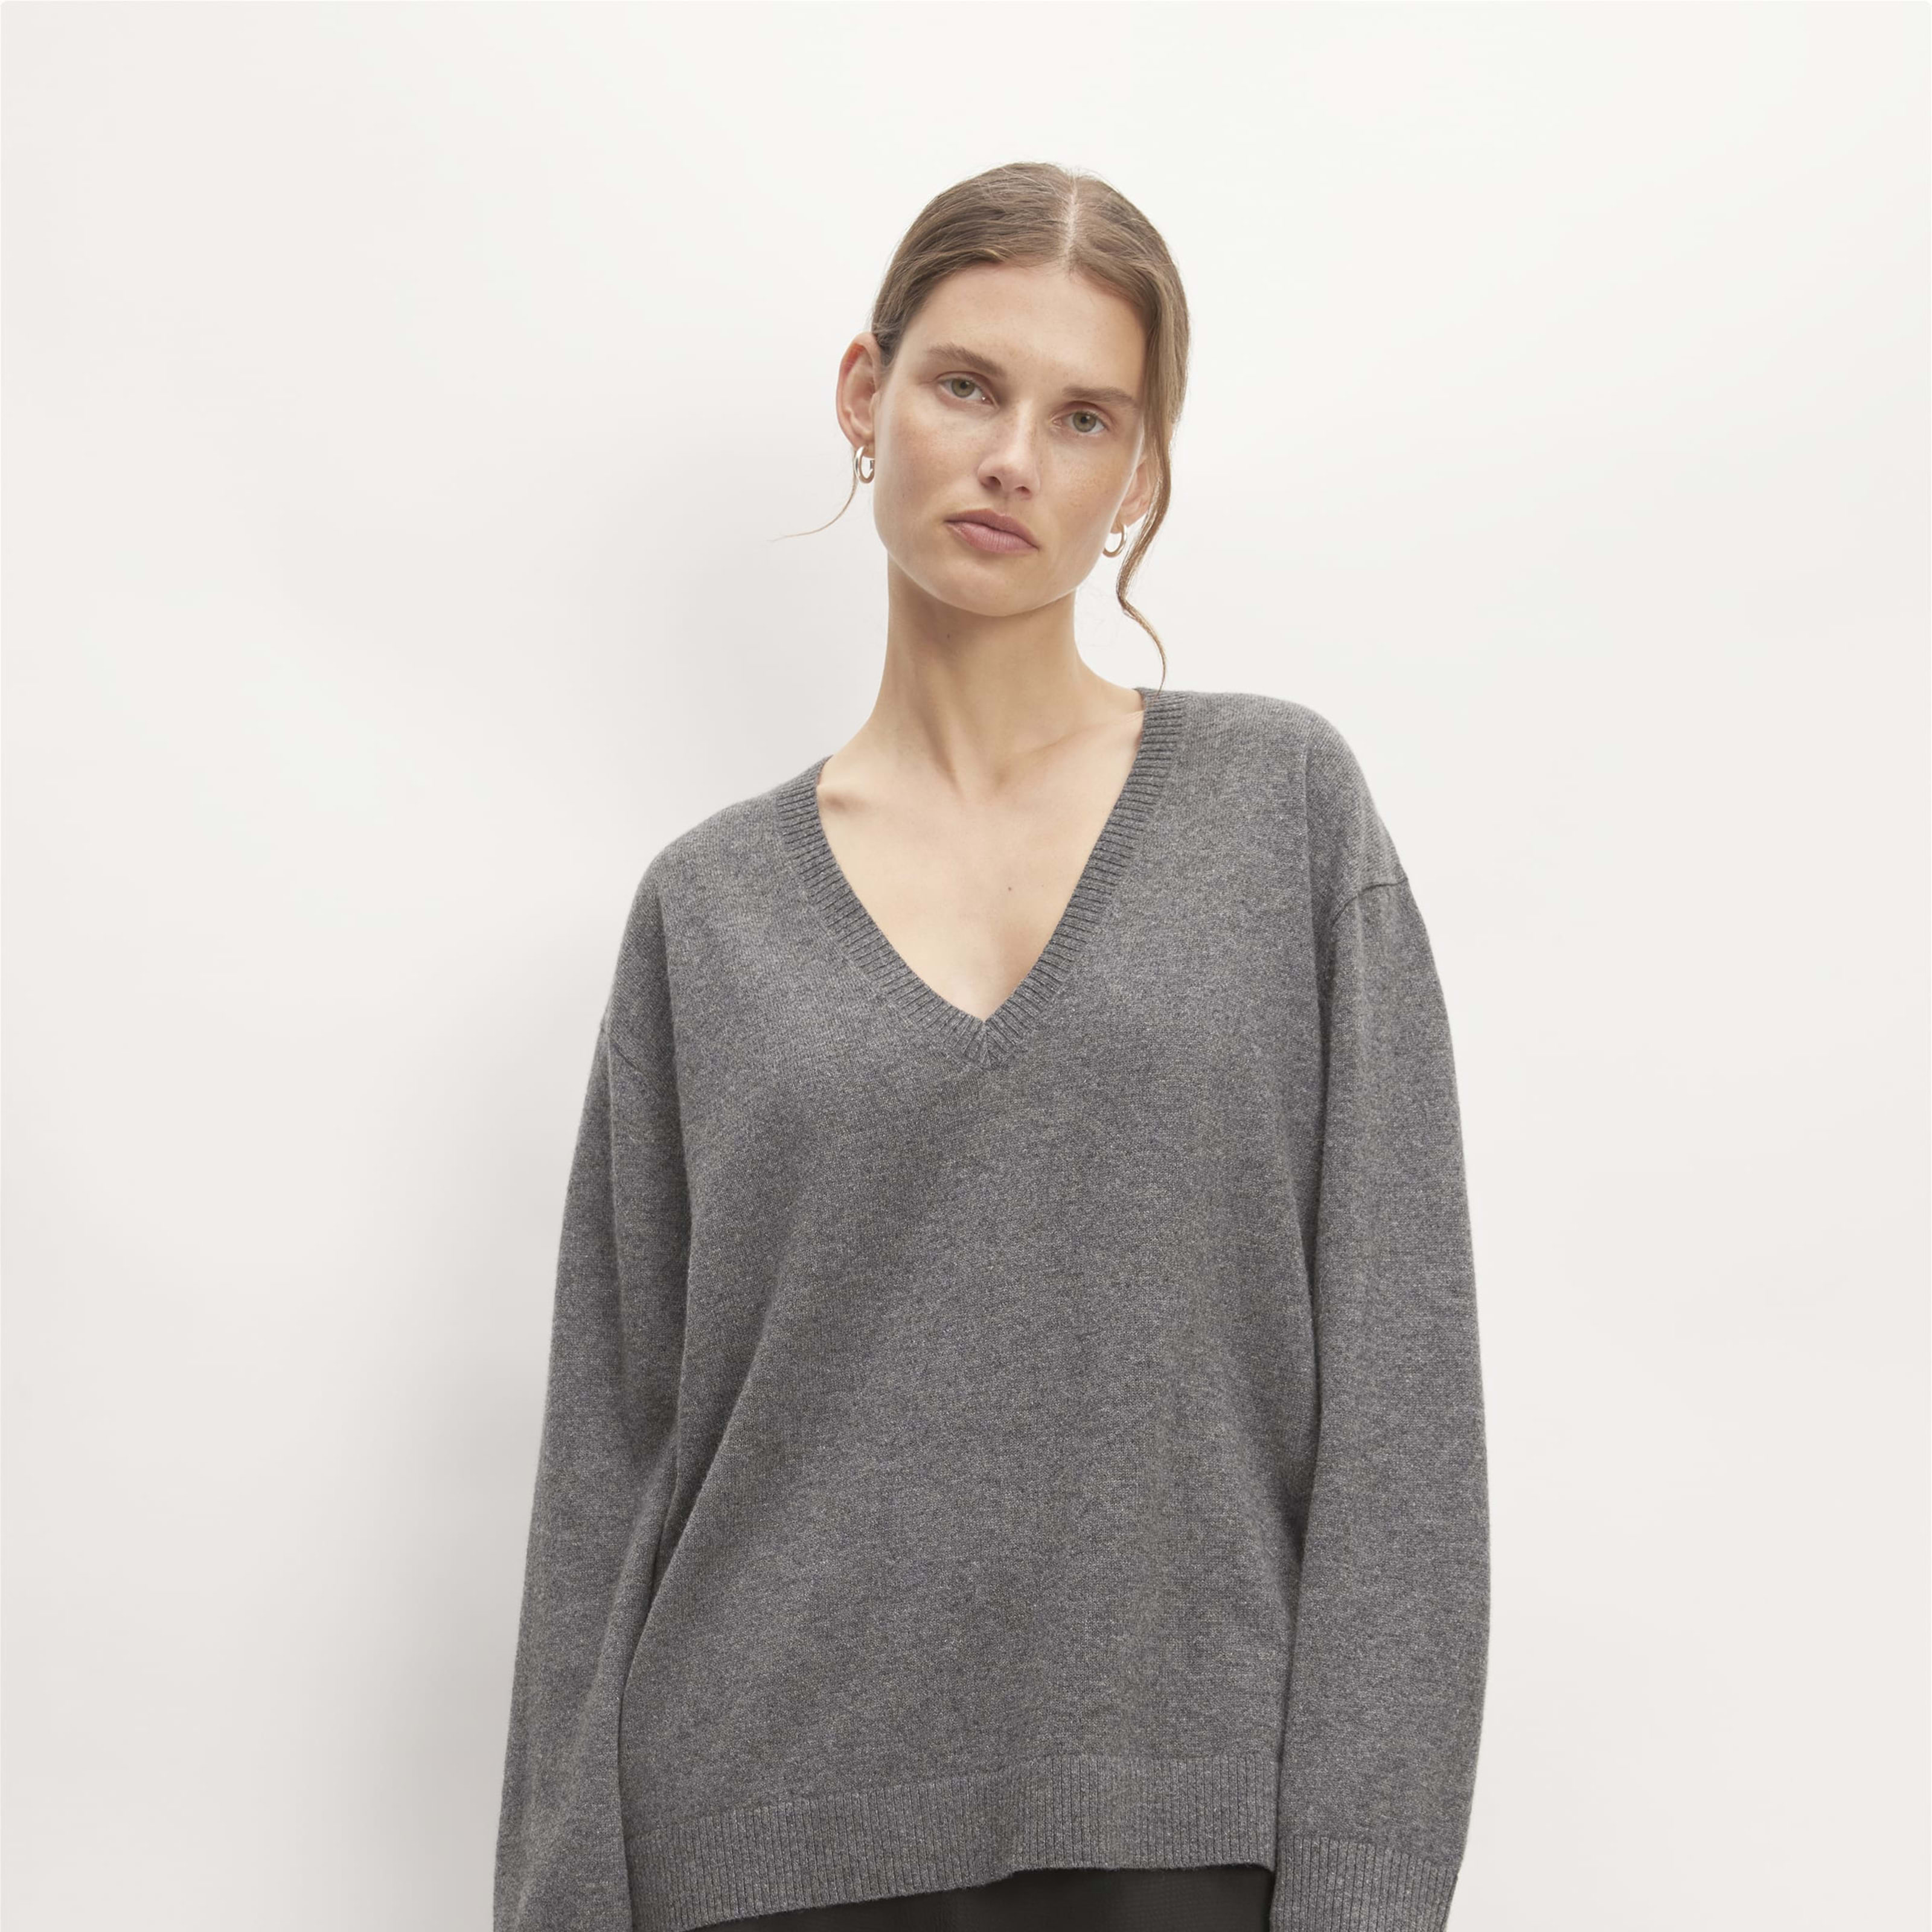 women's cashmere relaxed v-neck sweater by everlane in heather charcoal, size xxs